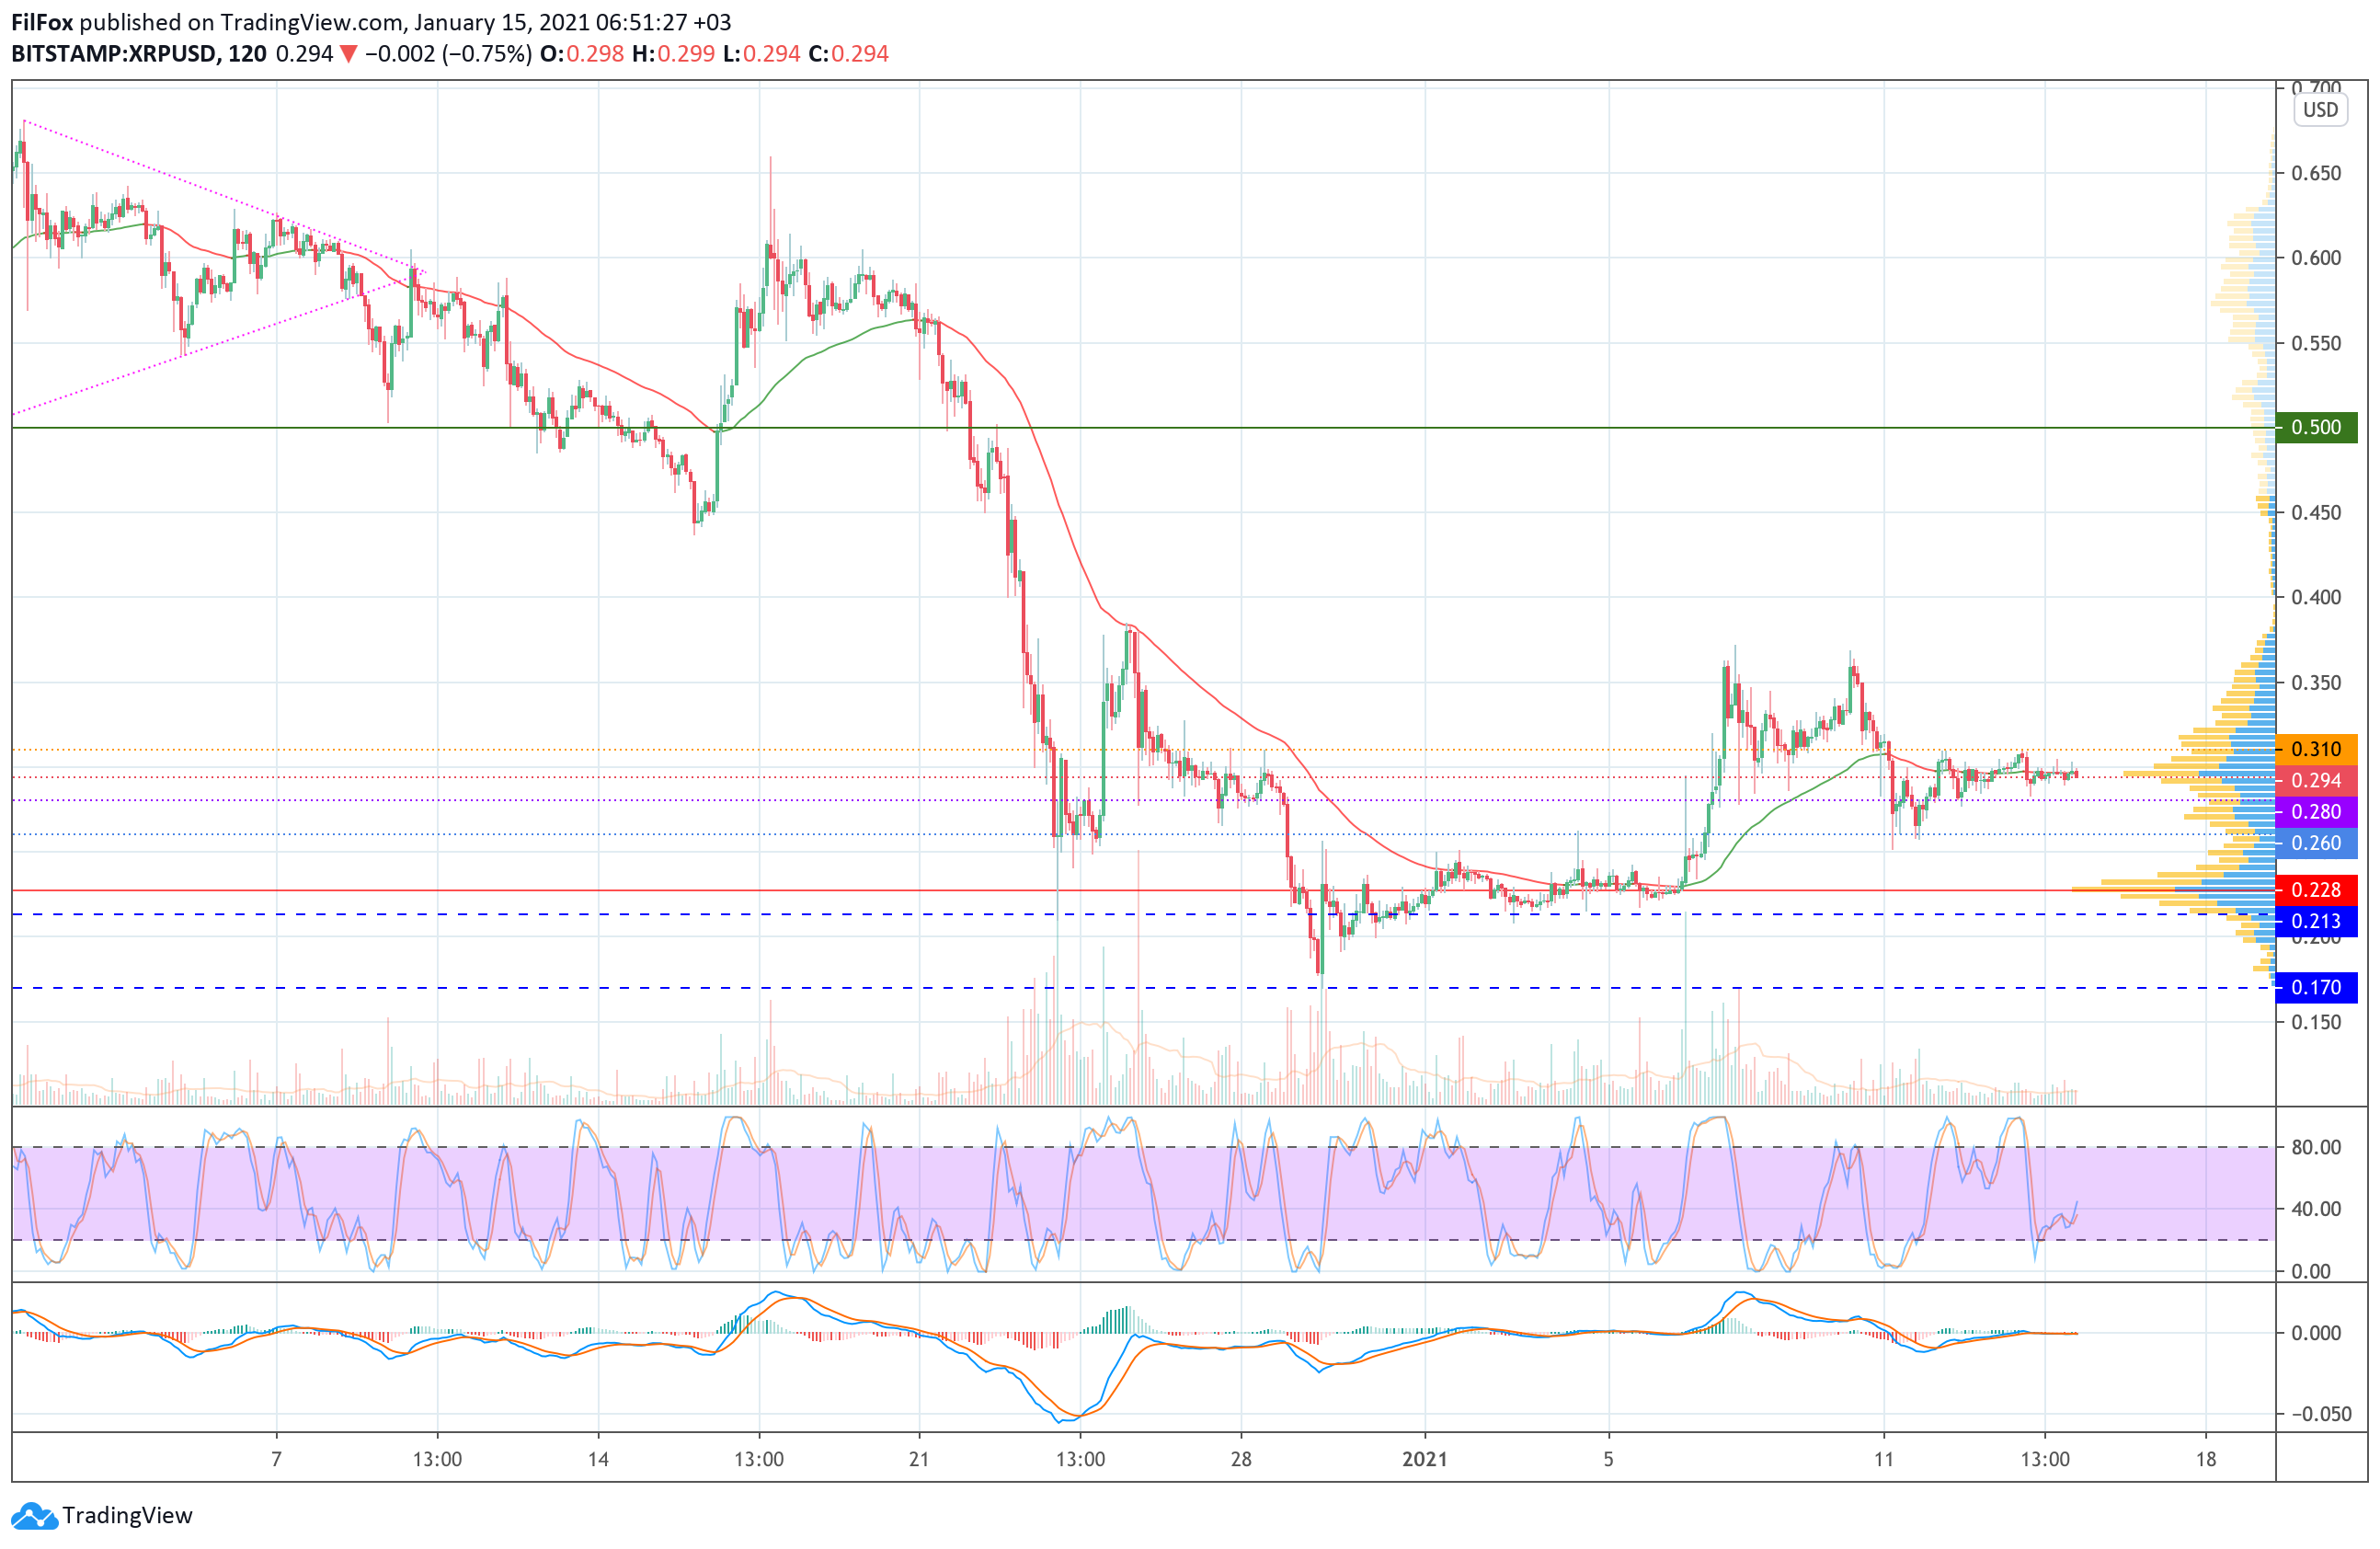 Analysis of prices for Bitcoin, Ethereum, Ripple for 01/15/2021